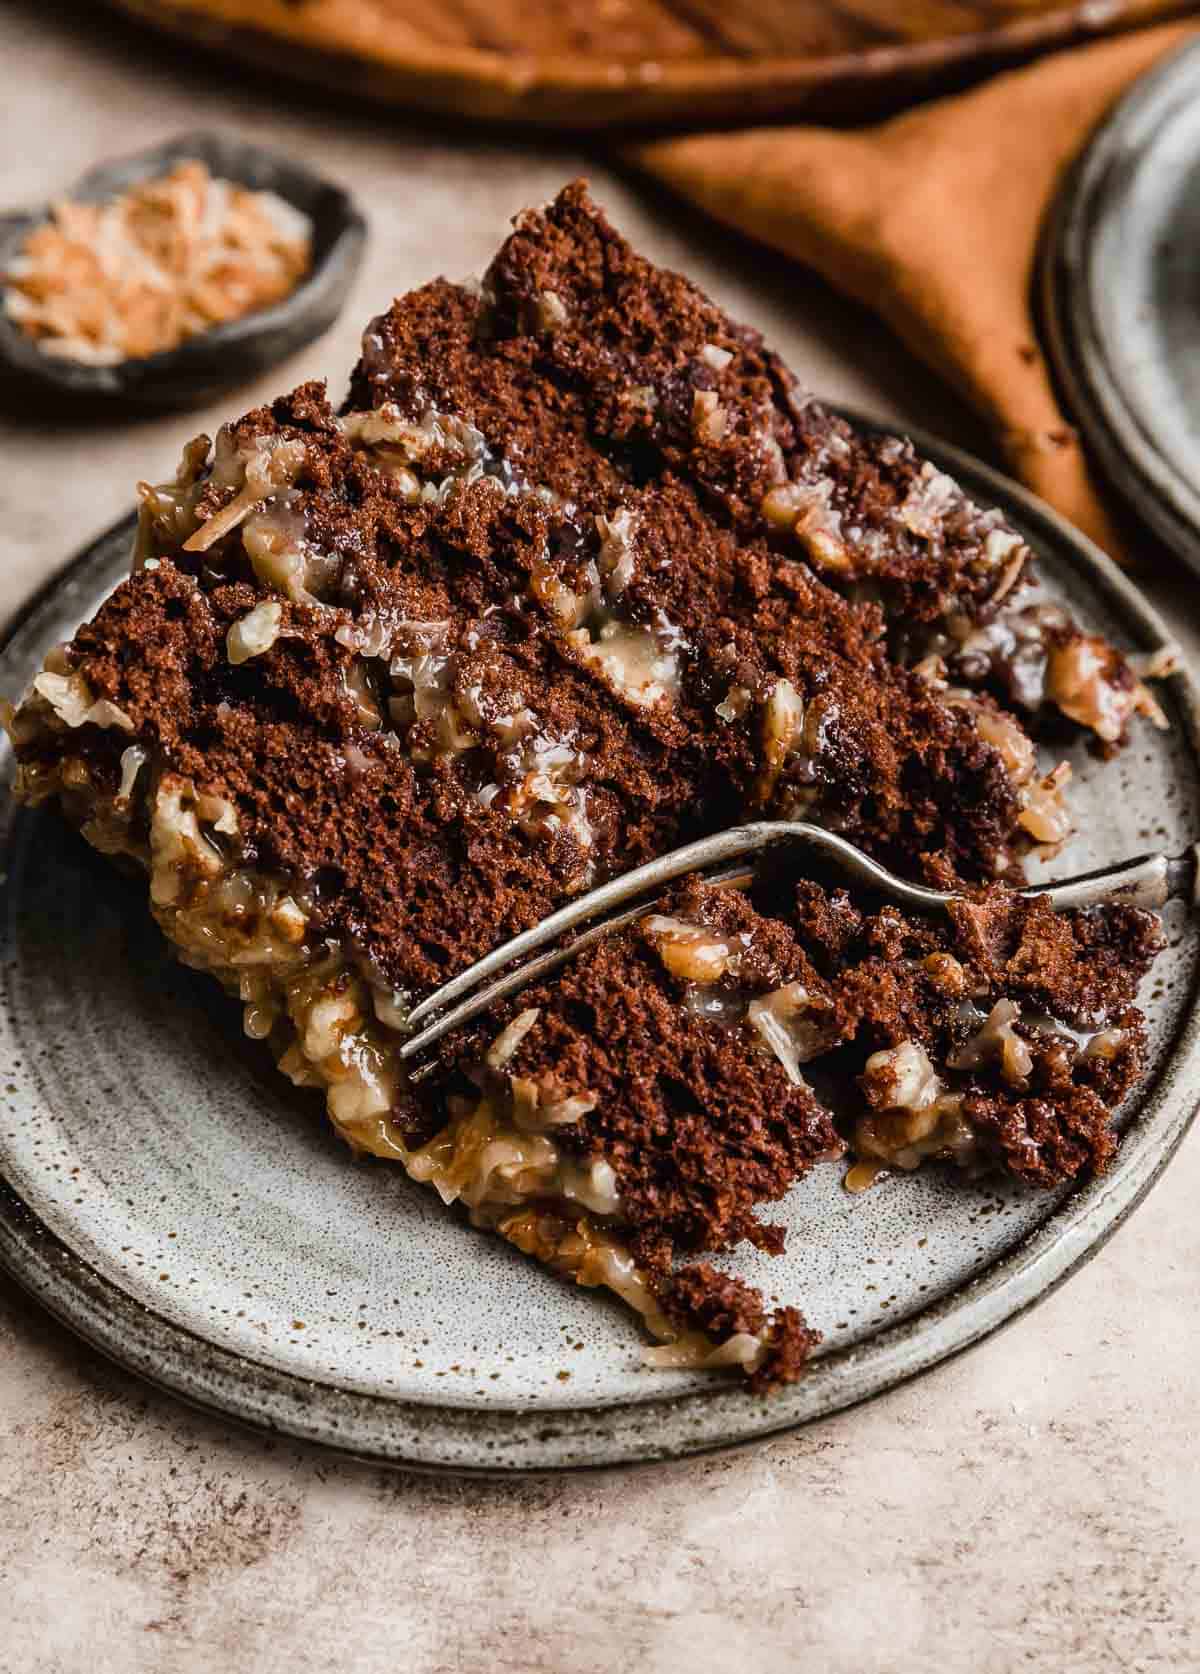 A slice of Traditional German Chocolate Cake made with sour cream, on a gray plate with a fork cutting into the cake.